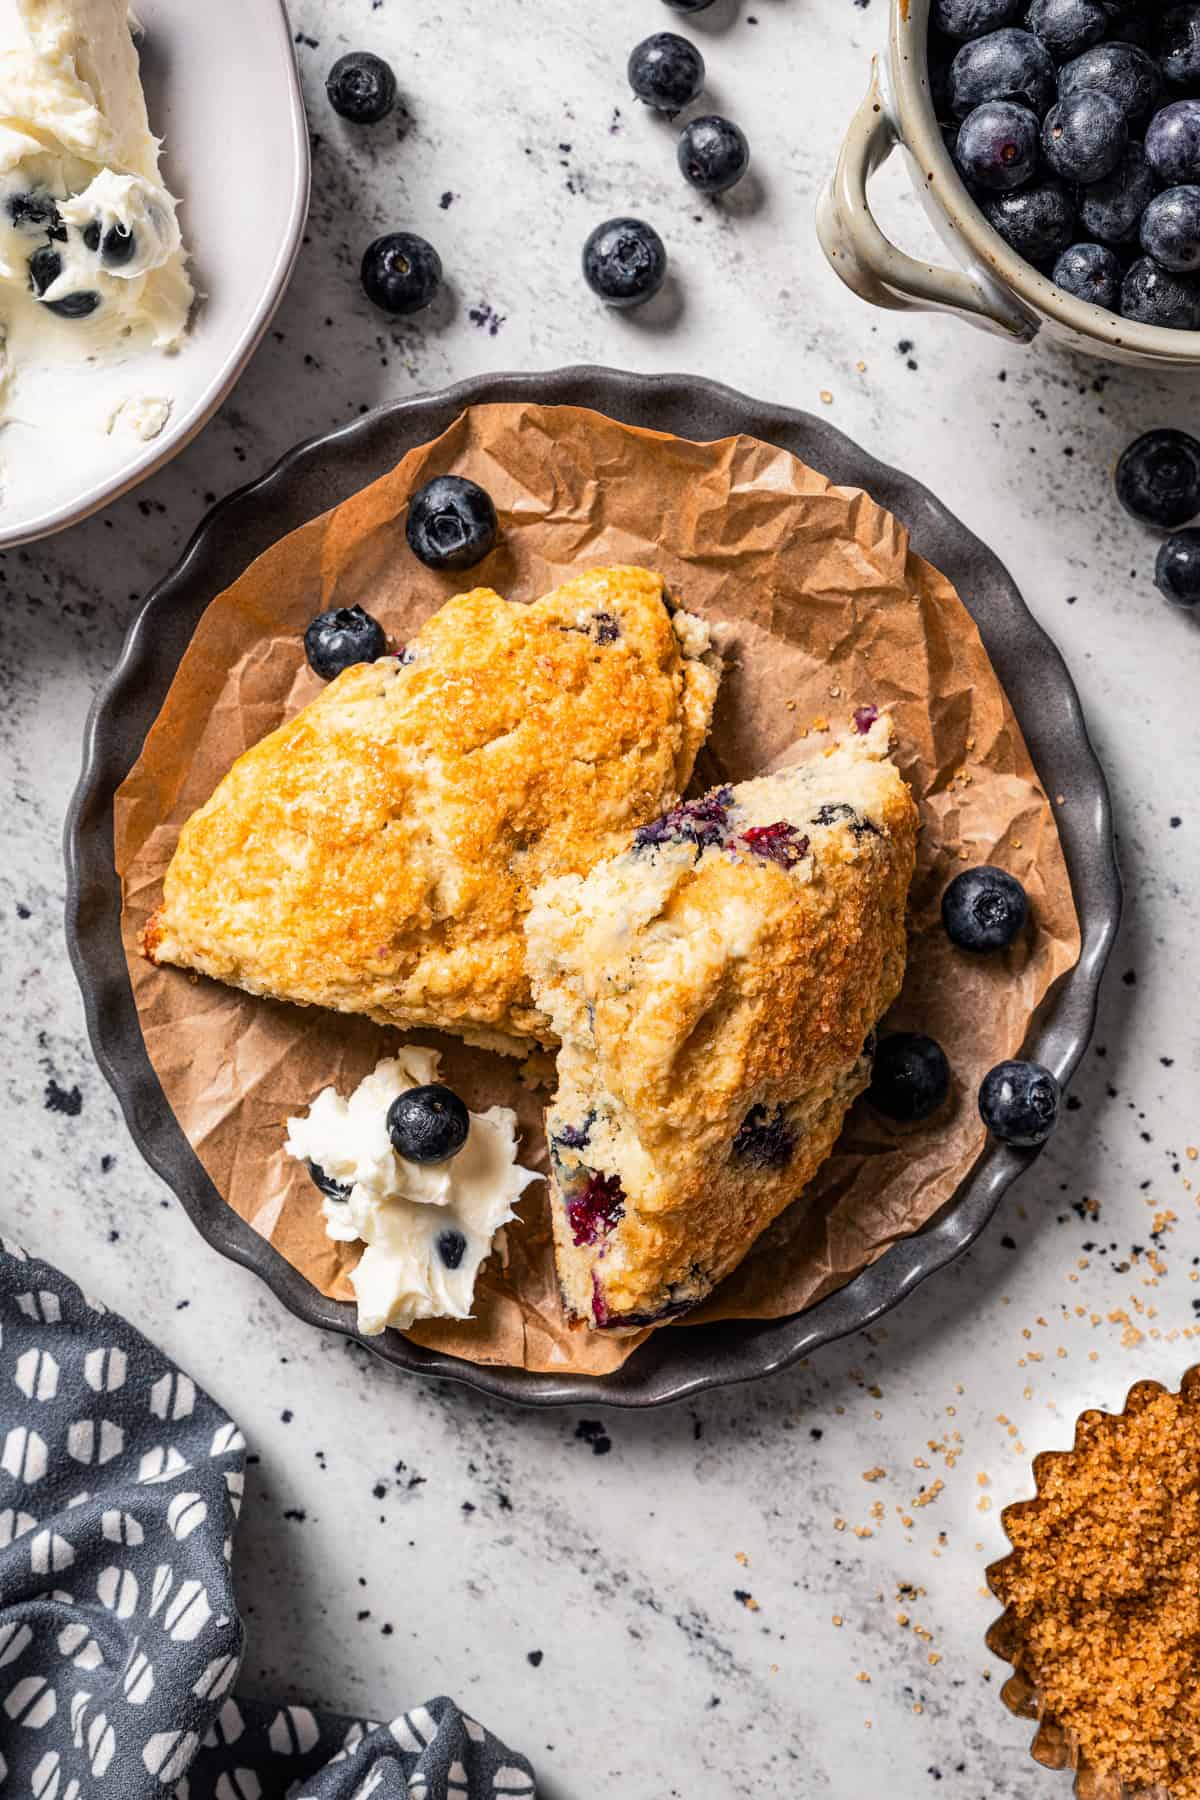 Overhead view of two blueberry scones on a parchment-lined plate next to a dollop of blueberry cream cheese, next to a bowl of blueberries.